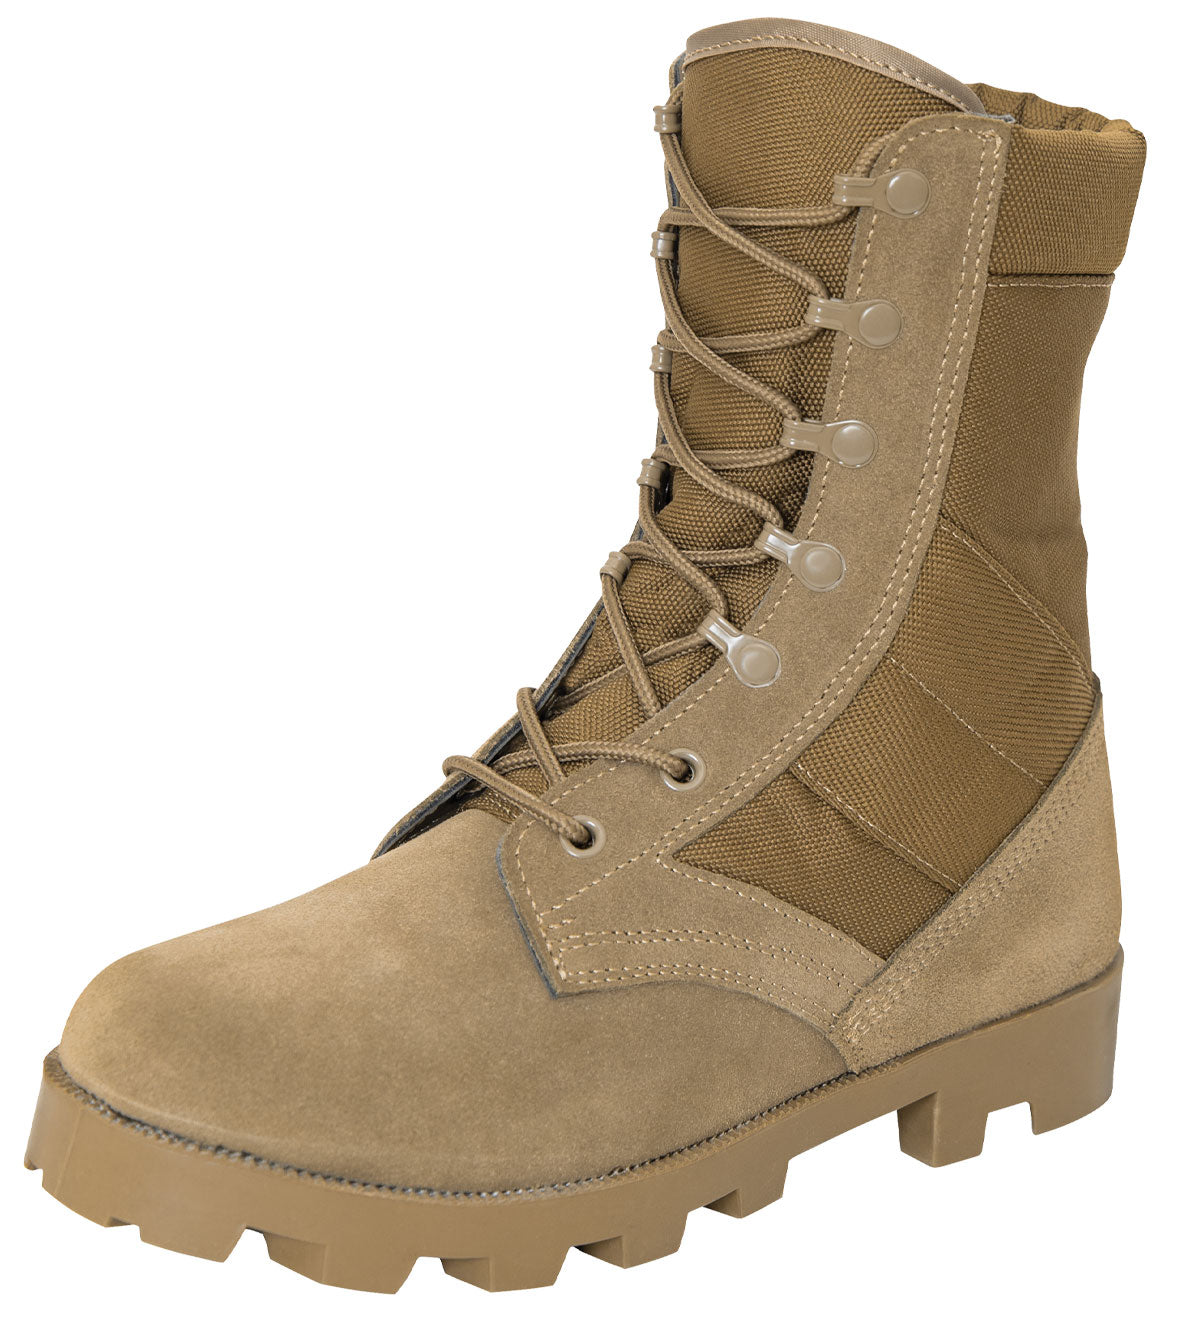 Rothco Speedlace Jungle Boot - 8 Inch - Tactical Choice Plus